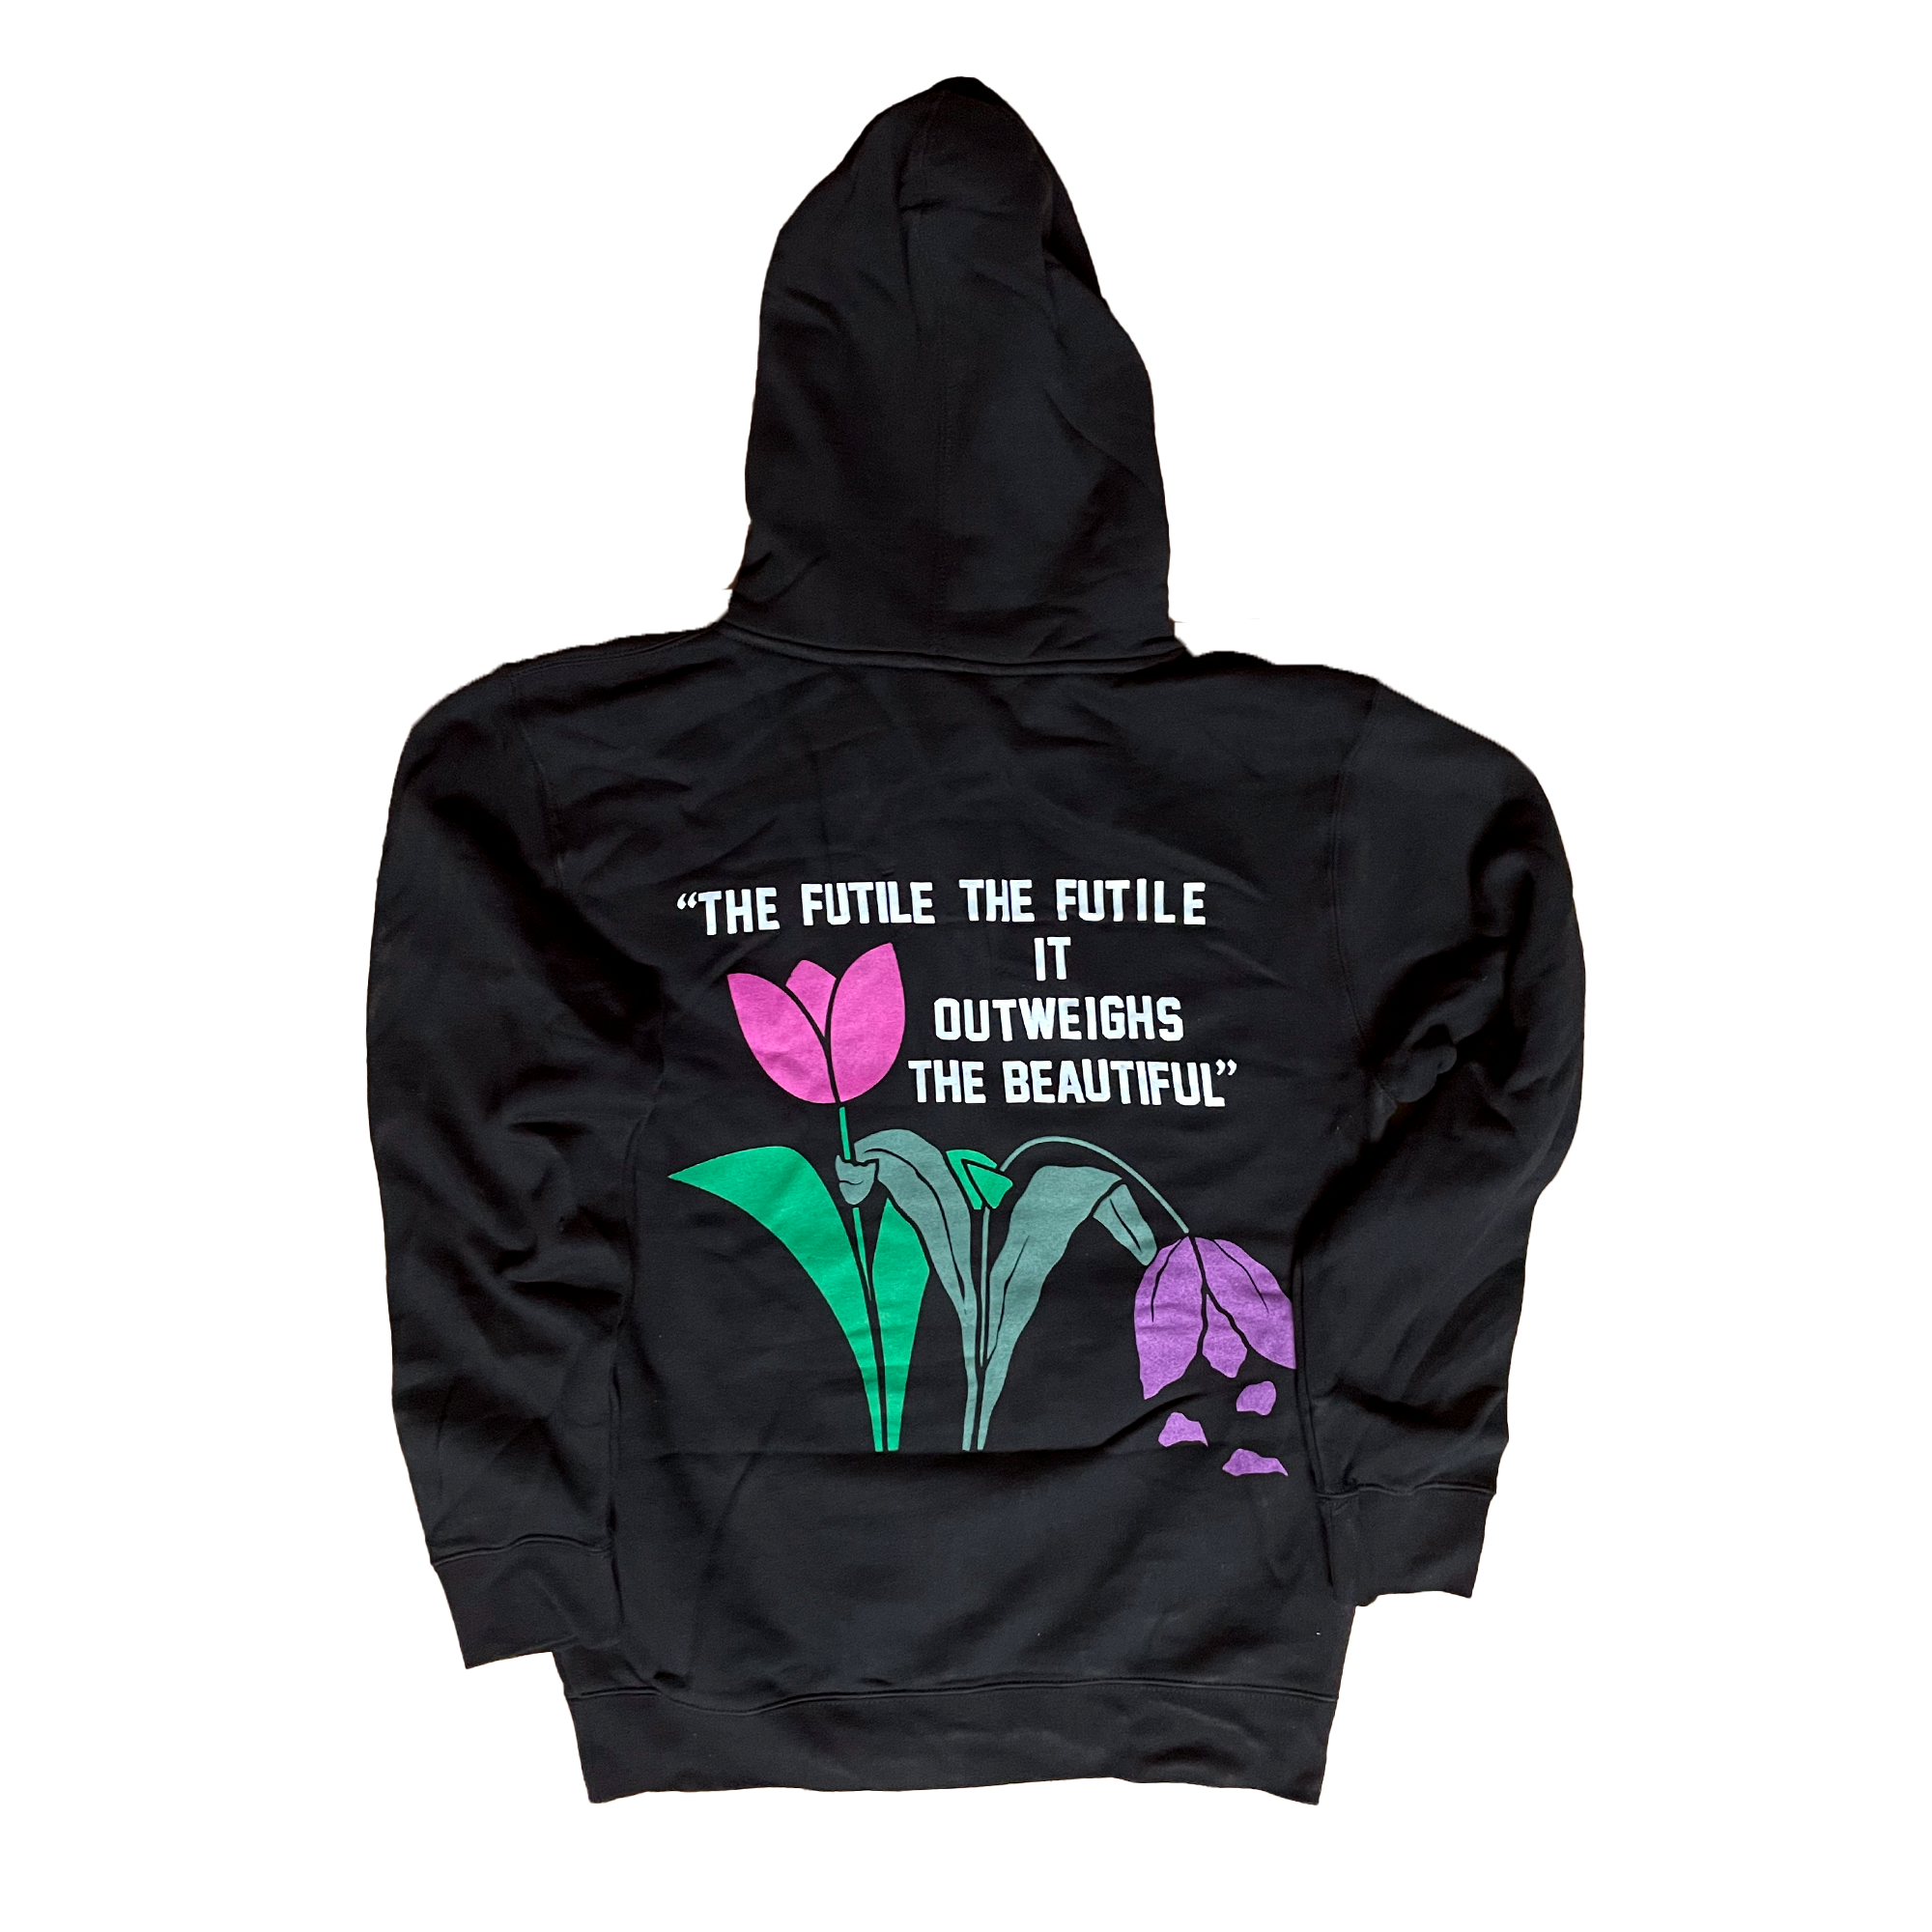 Say Anything - The Futile Zip-Up Hoodie